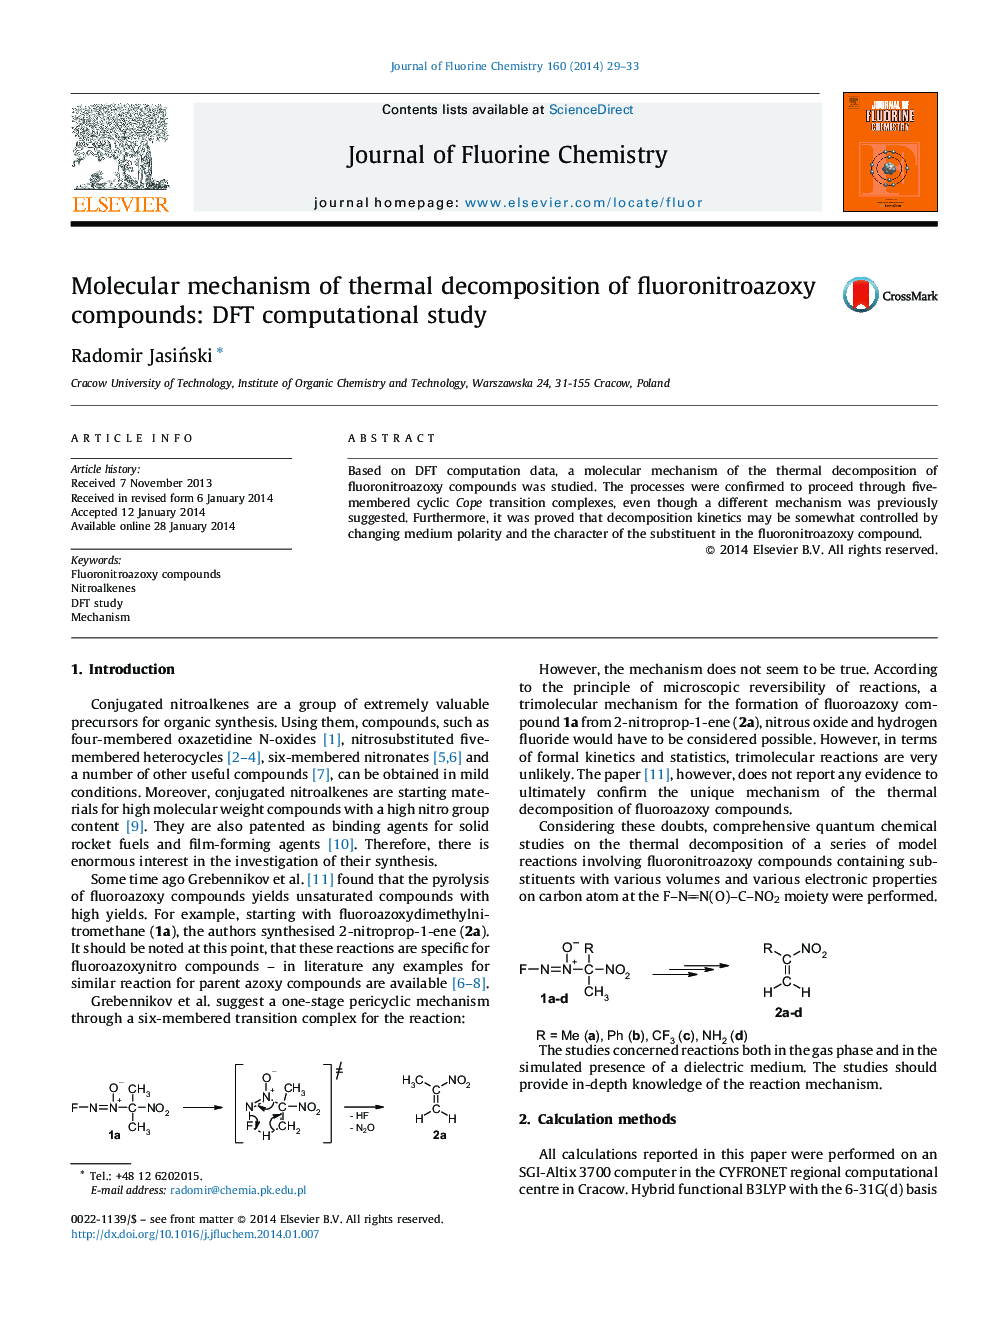 Molecular mechanism of thermal decomposition of fluoronitroazoxy compounds: DFT computational study